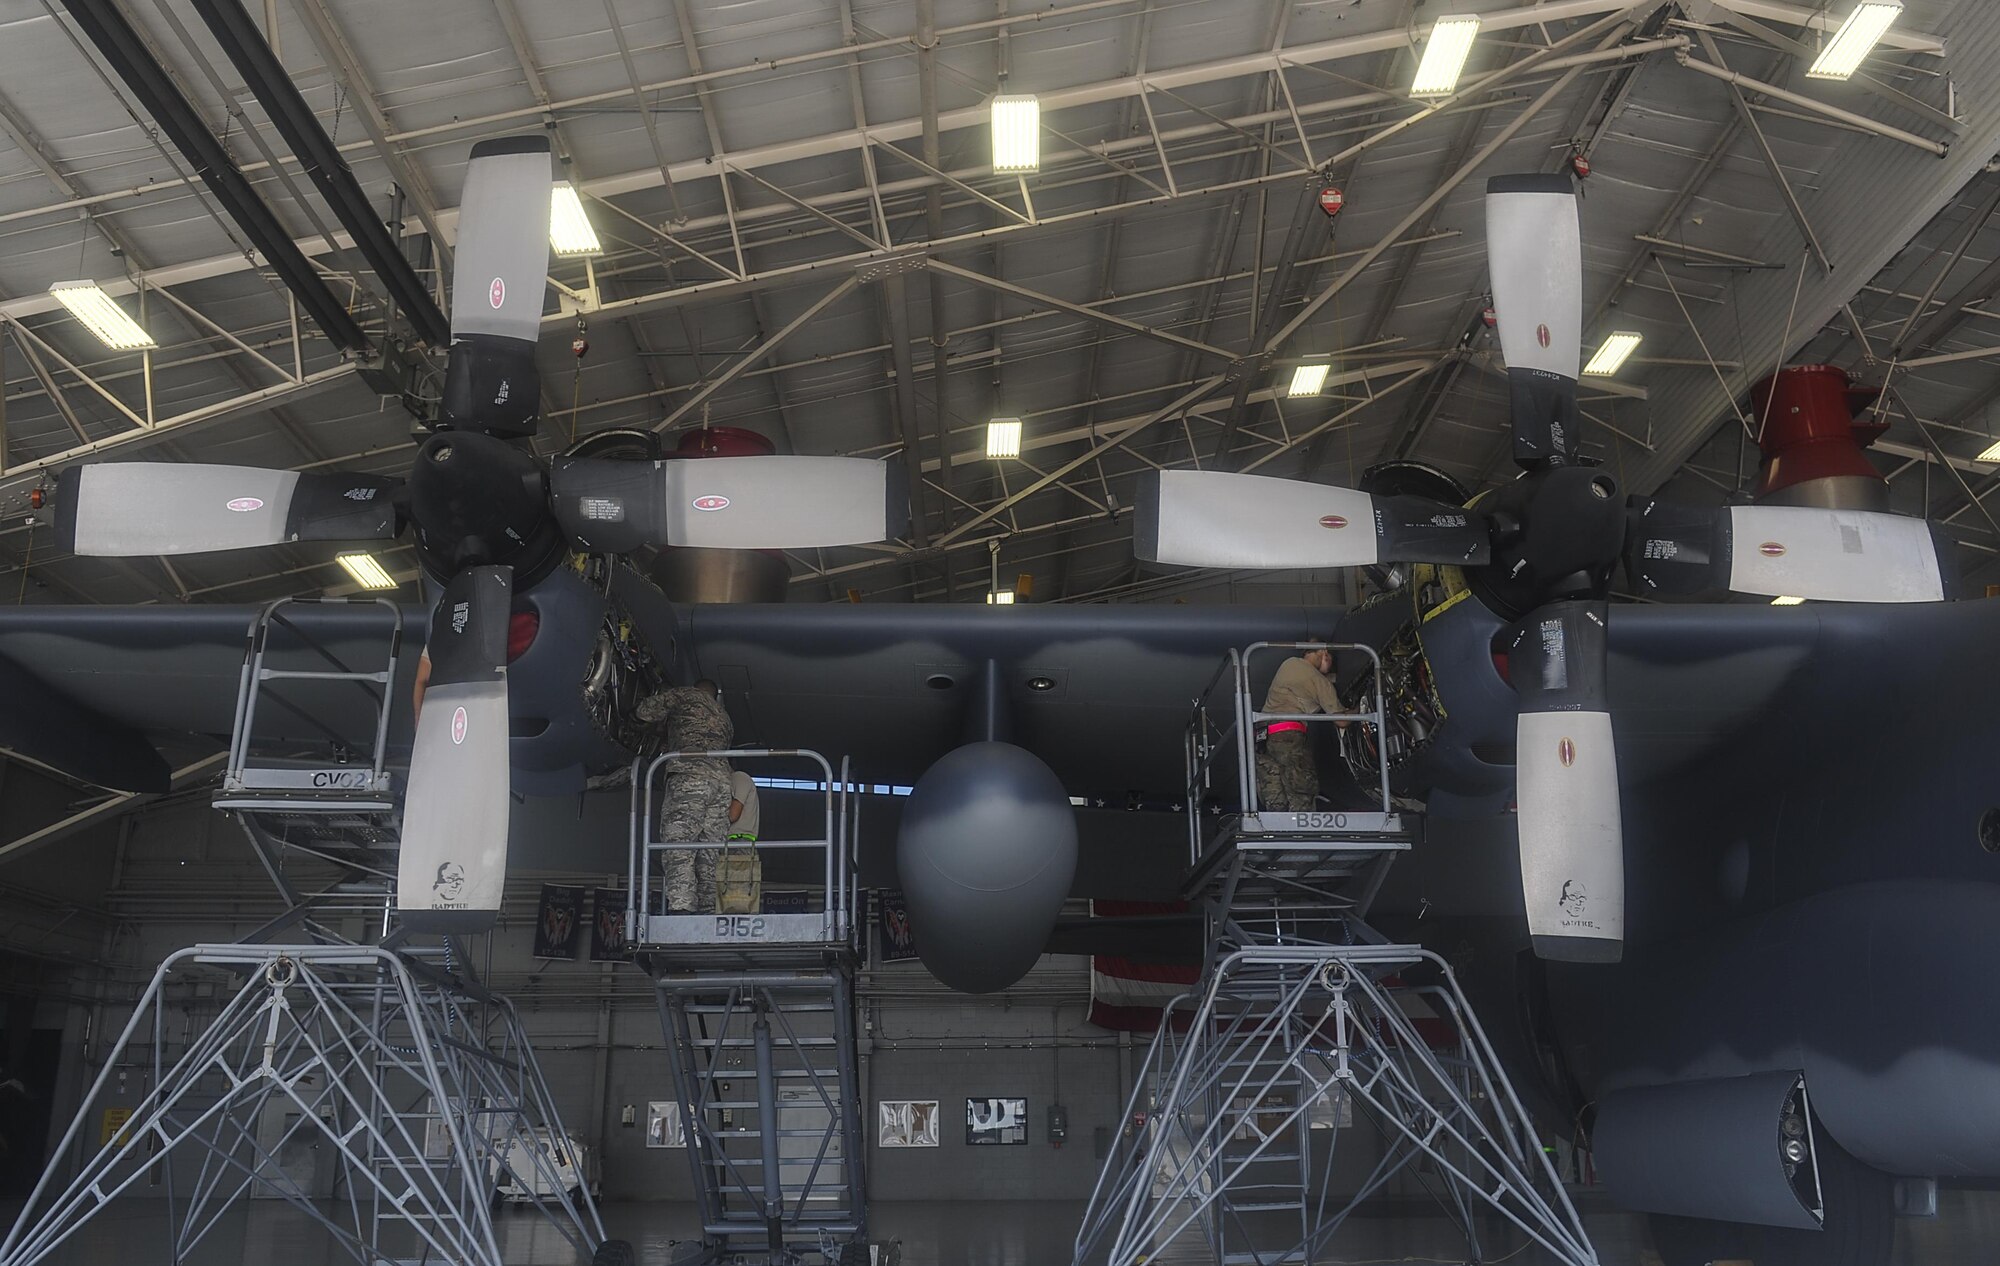 Air Commandos with the 1st Special Operations Aircraft Maintenance Squadron conduct maintenance on the engines of an AC-130U Spooky gunship at Hurlburt Field, Fla., July 6, 2017. The AC-130U is one of the Air Force’s premiere multi-role aircraft. It is used for missions such as close-air support, air interdiction and armed reconnaissance. (U.S. Air Force photo by Airman 1st Class Rachel Yates)